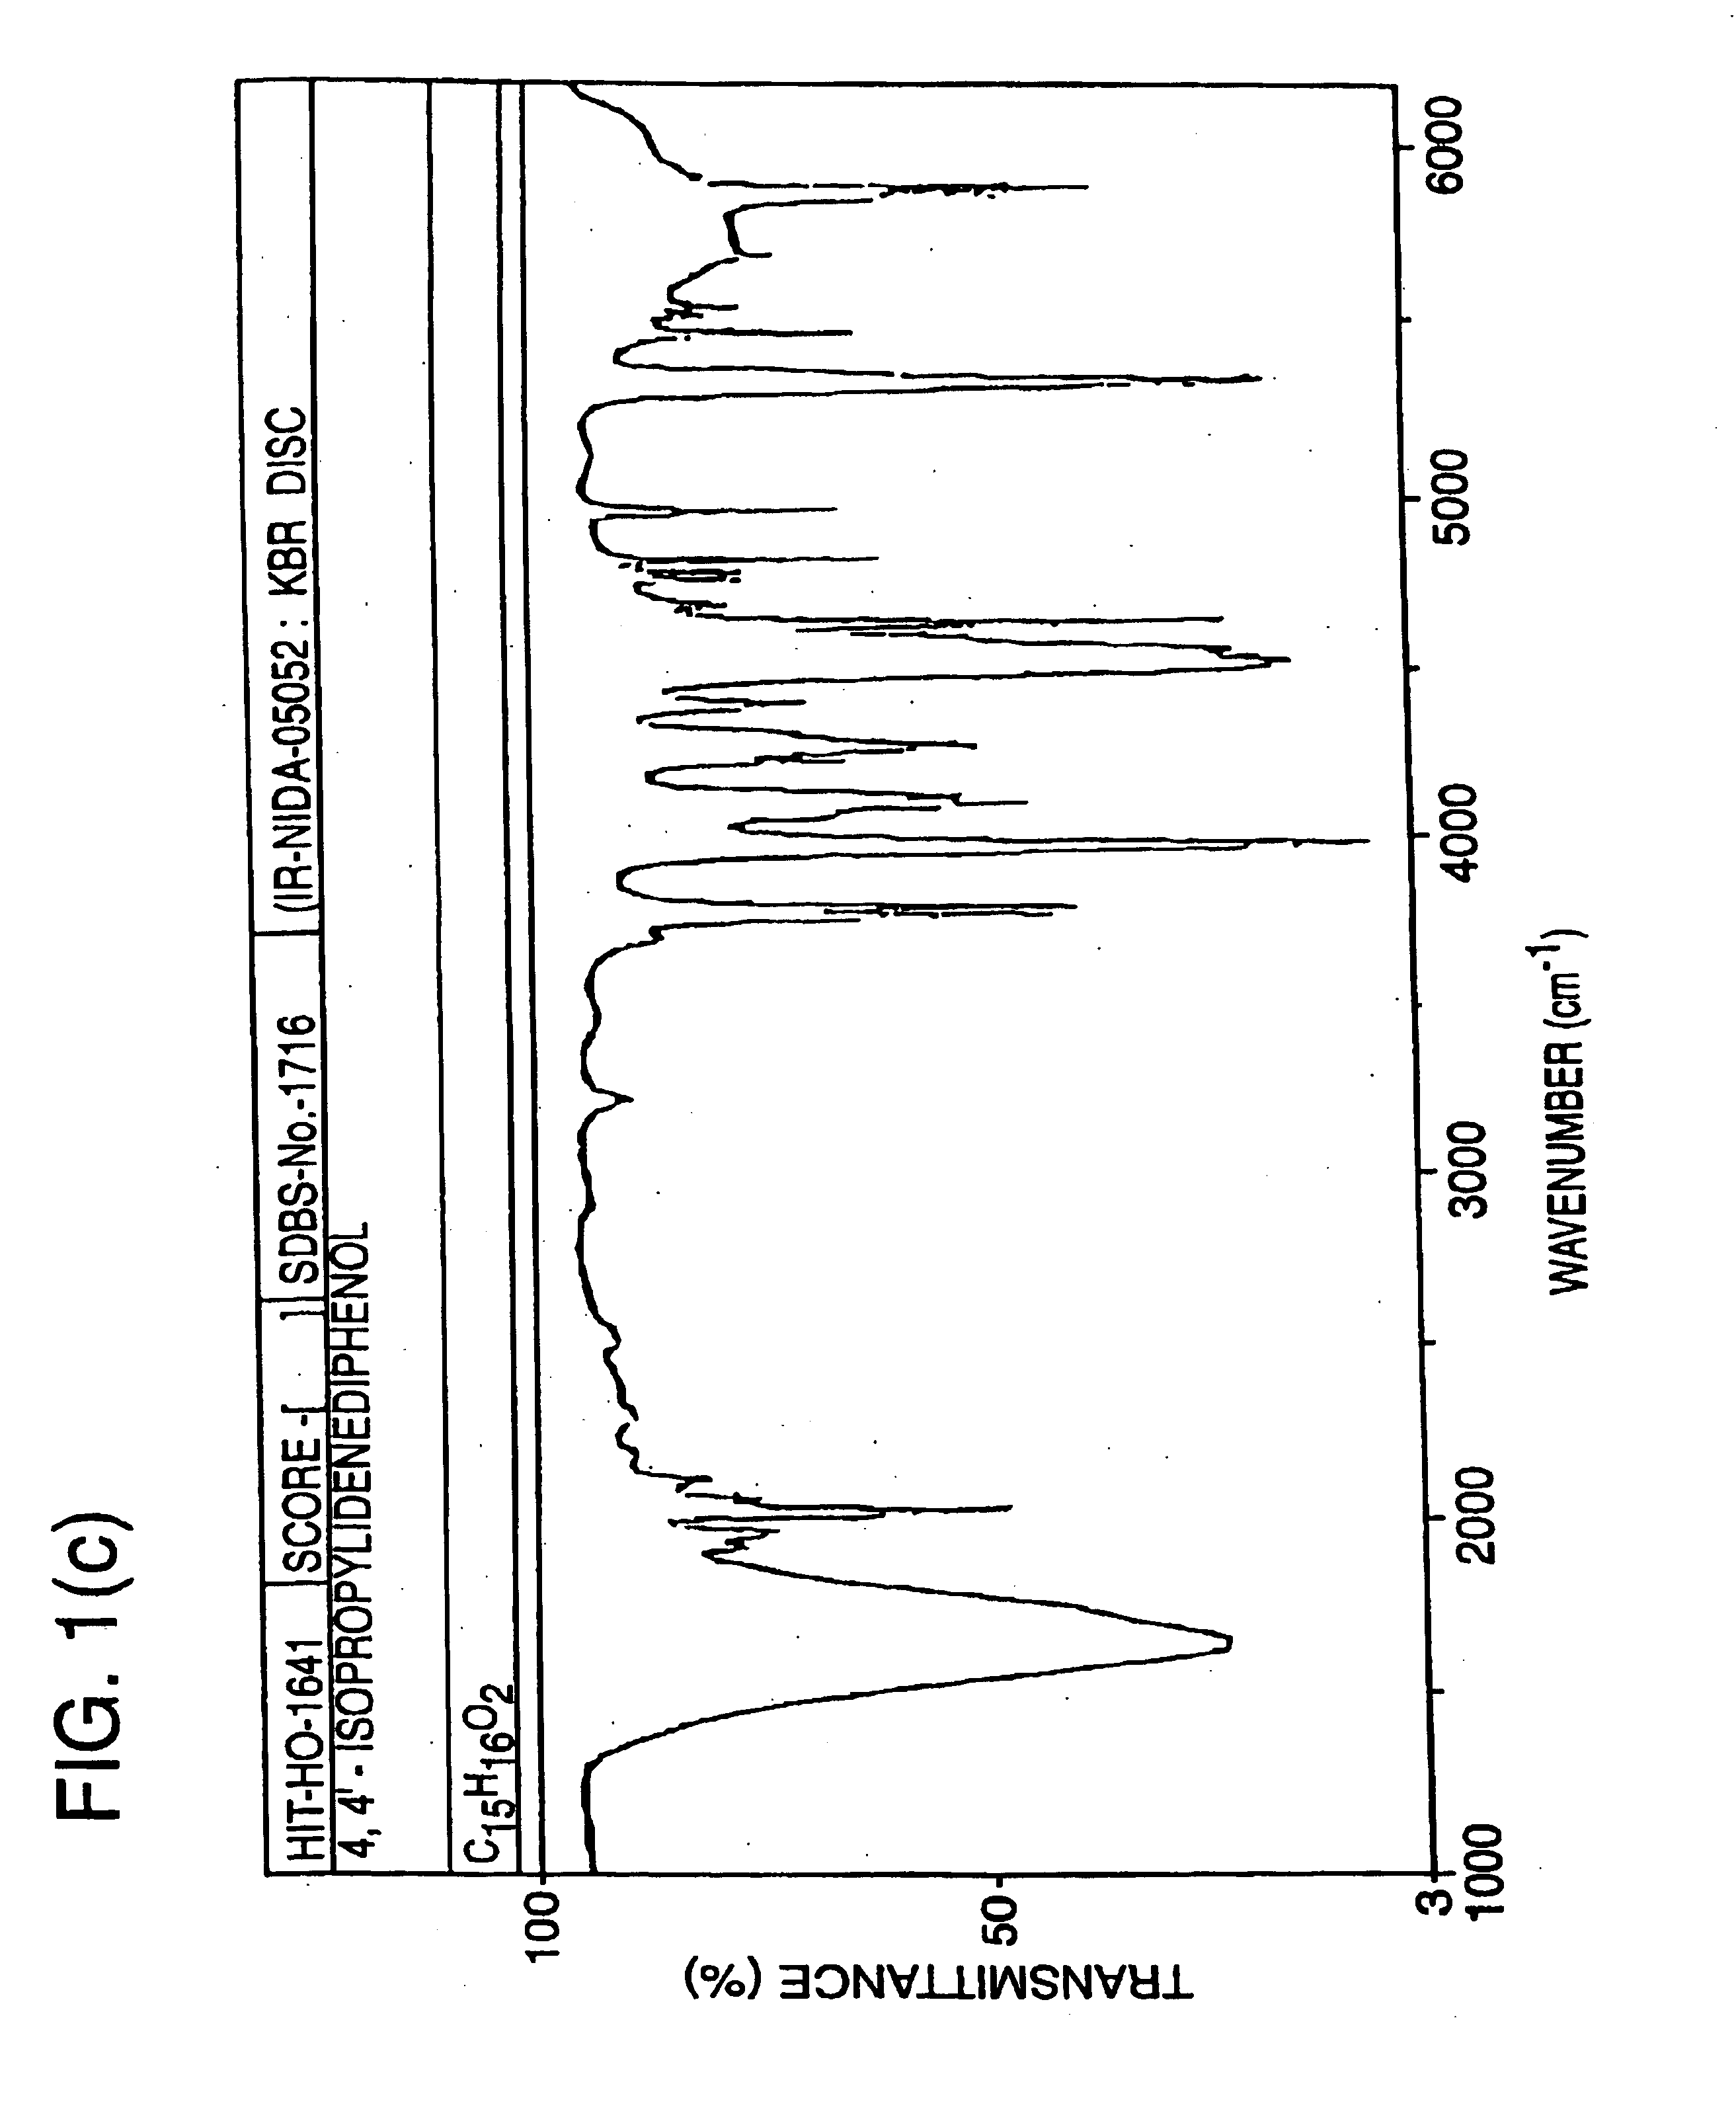 Methods for predicting the biological, chemical, and physical properties of molecules from their spectral properties